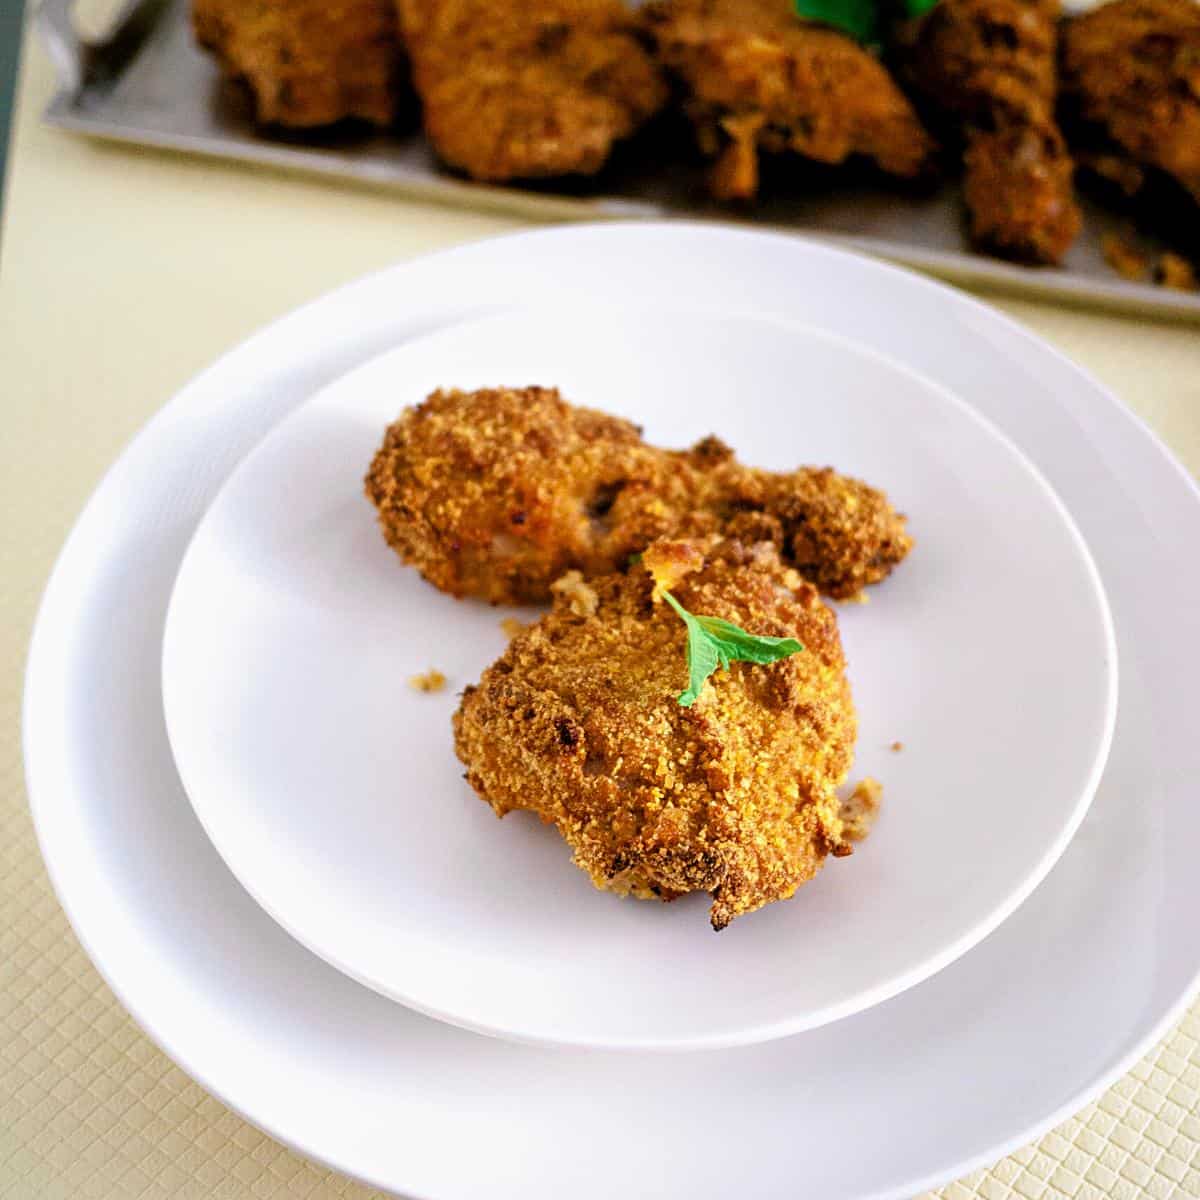 A plate with oven baked crispy chicken.